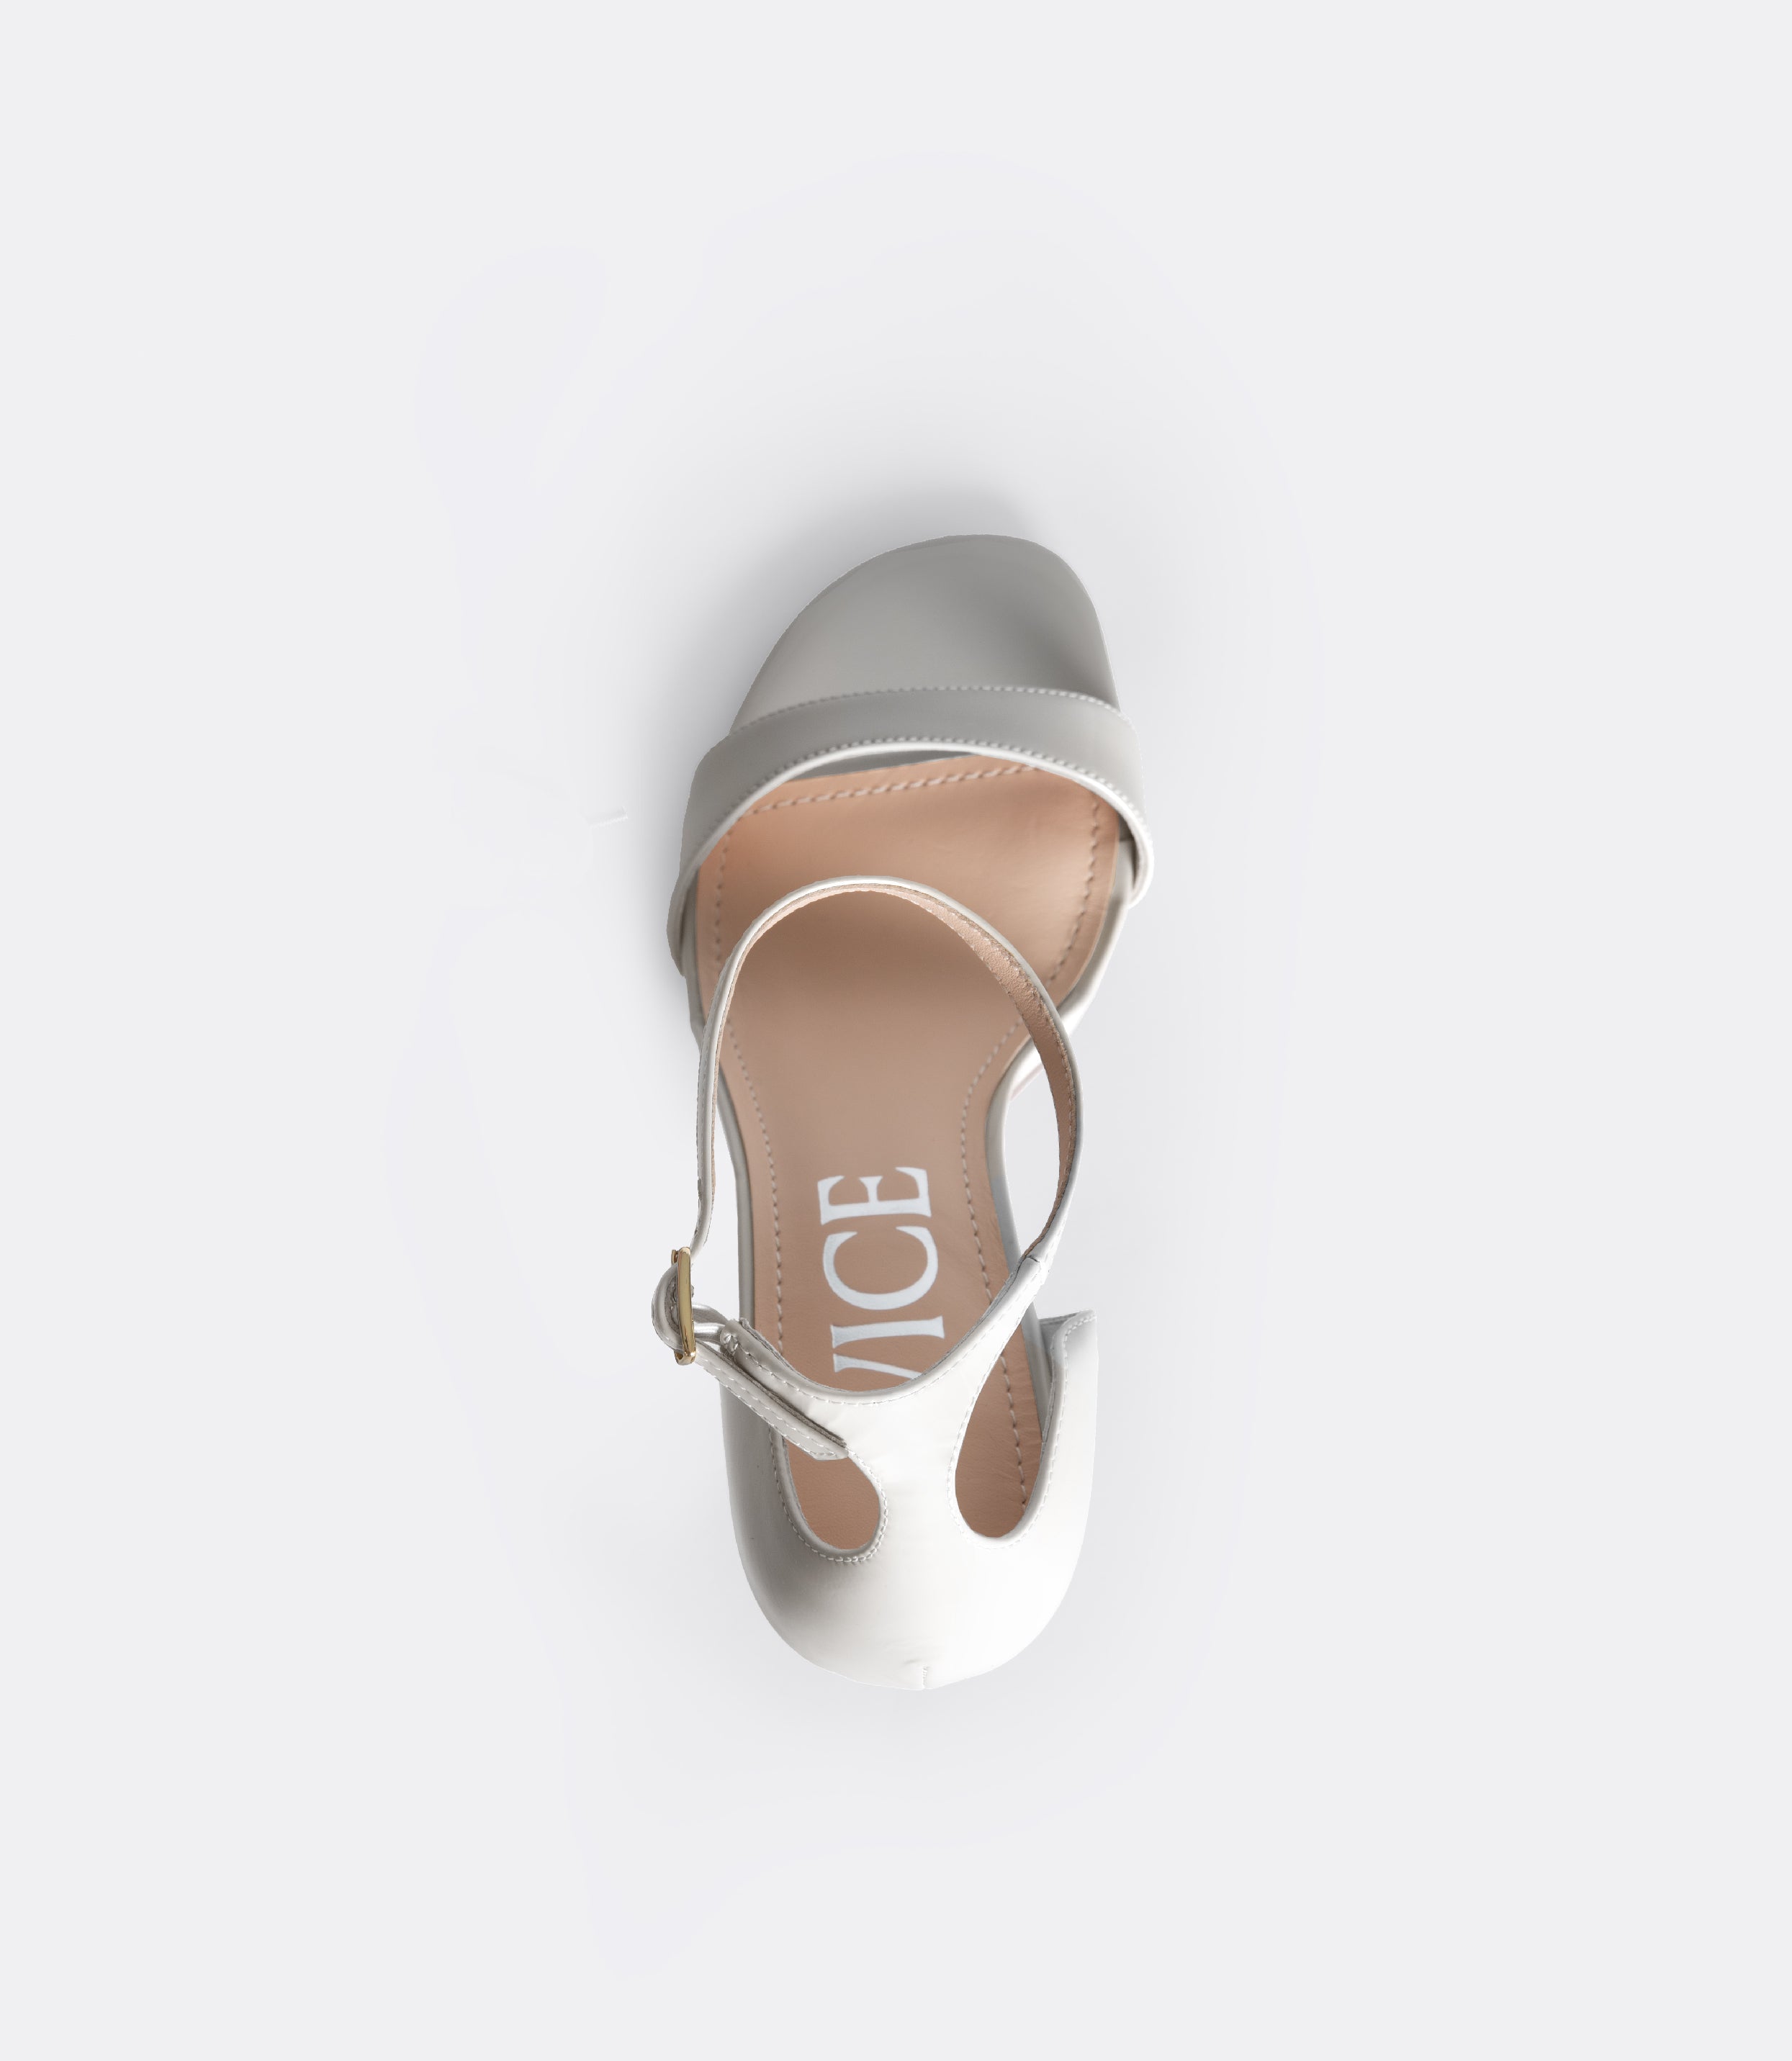 Top view of the white editor sandal.